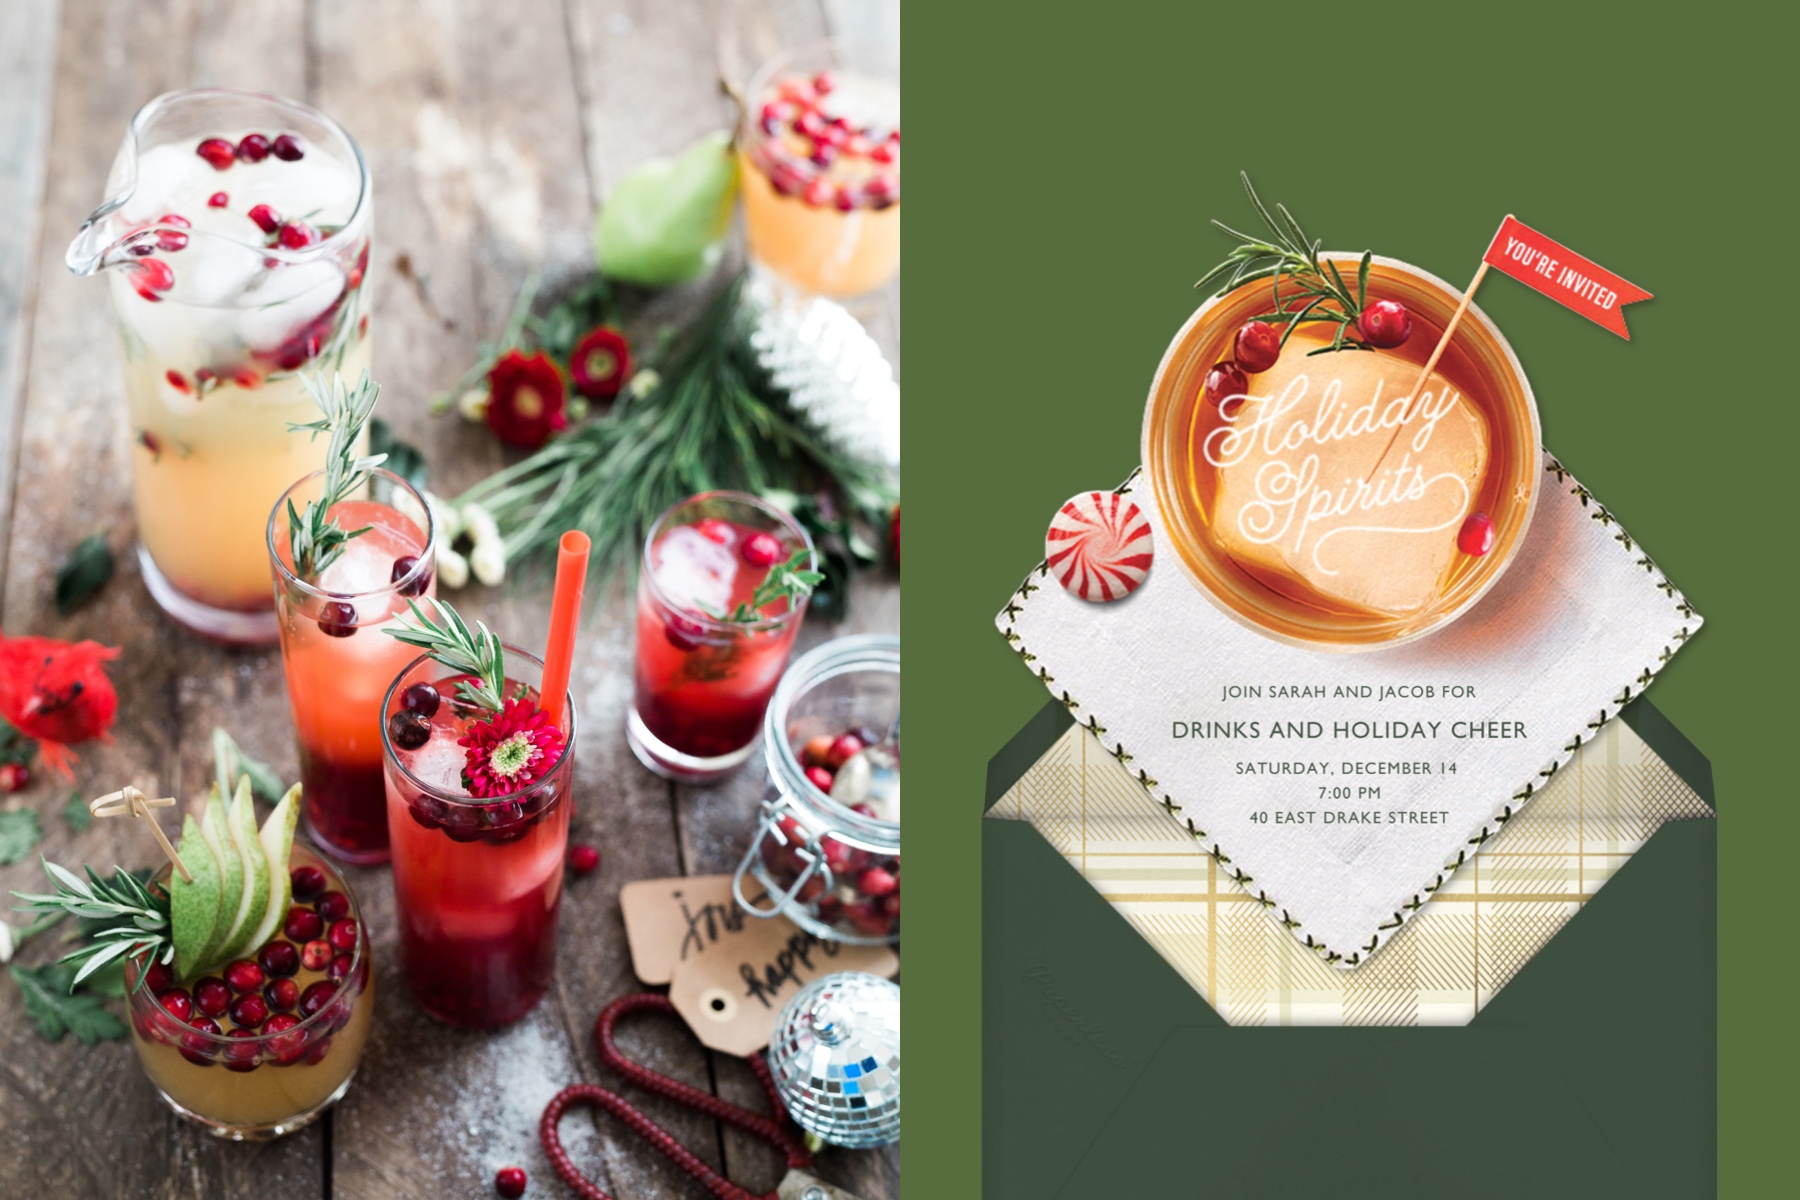 Left: A colorful assortment of holiday cocktails. Right: A card showing a holiday cocktail from above with a toothpick flag that reads “You’re invited.”